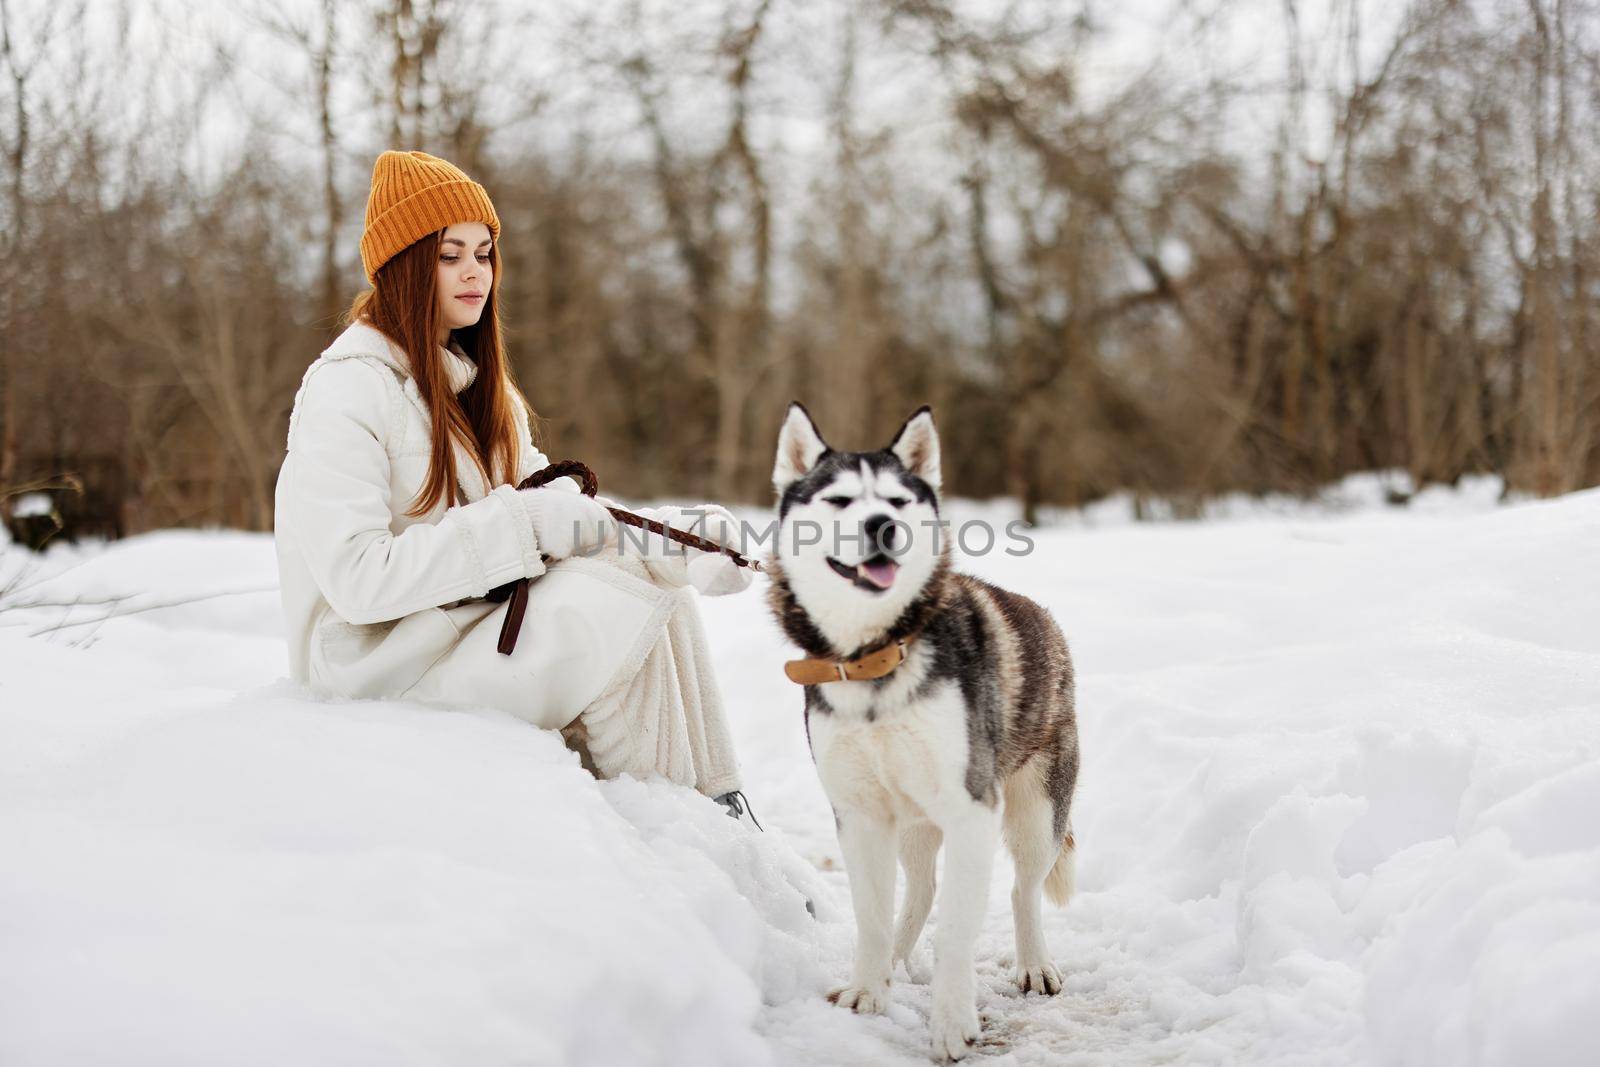 portrait of a woman in the snow playing with a dog outdoors friendship winter holidays. High quality photo